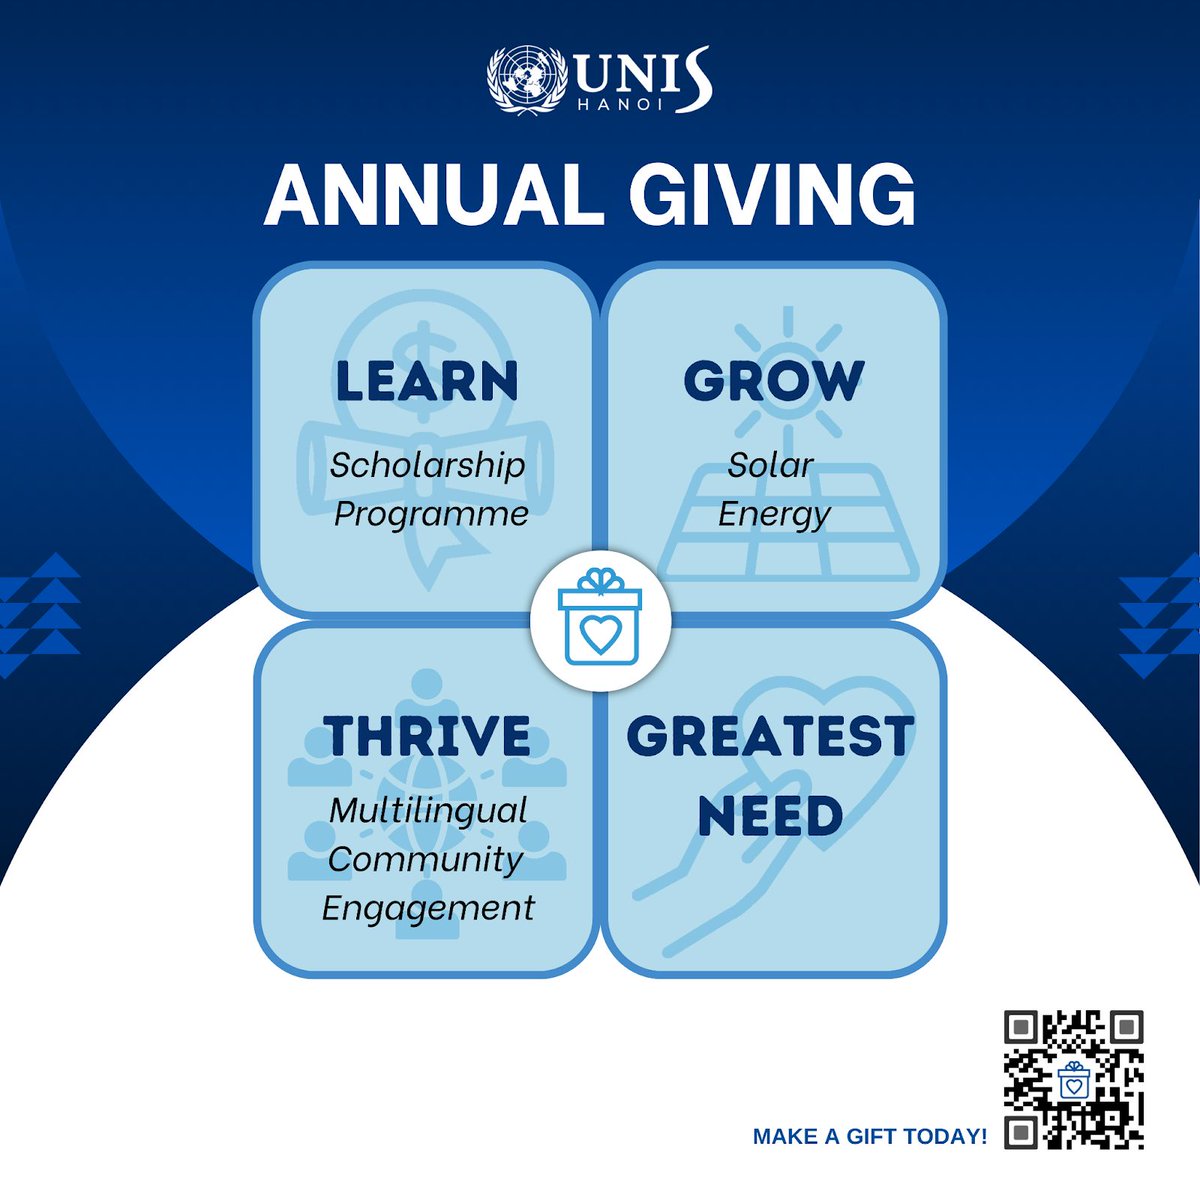 #GivingTuesday is almost here! 🎉 Join us in celebrating this global day of philanthropy and kicking off our Annual Giving Campaign, where your generosity 🎁 will make a lasting impact on the UNIS community. #AnnualGiving #LearnGrowThrive